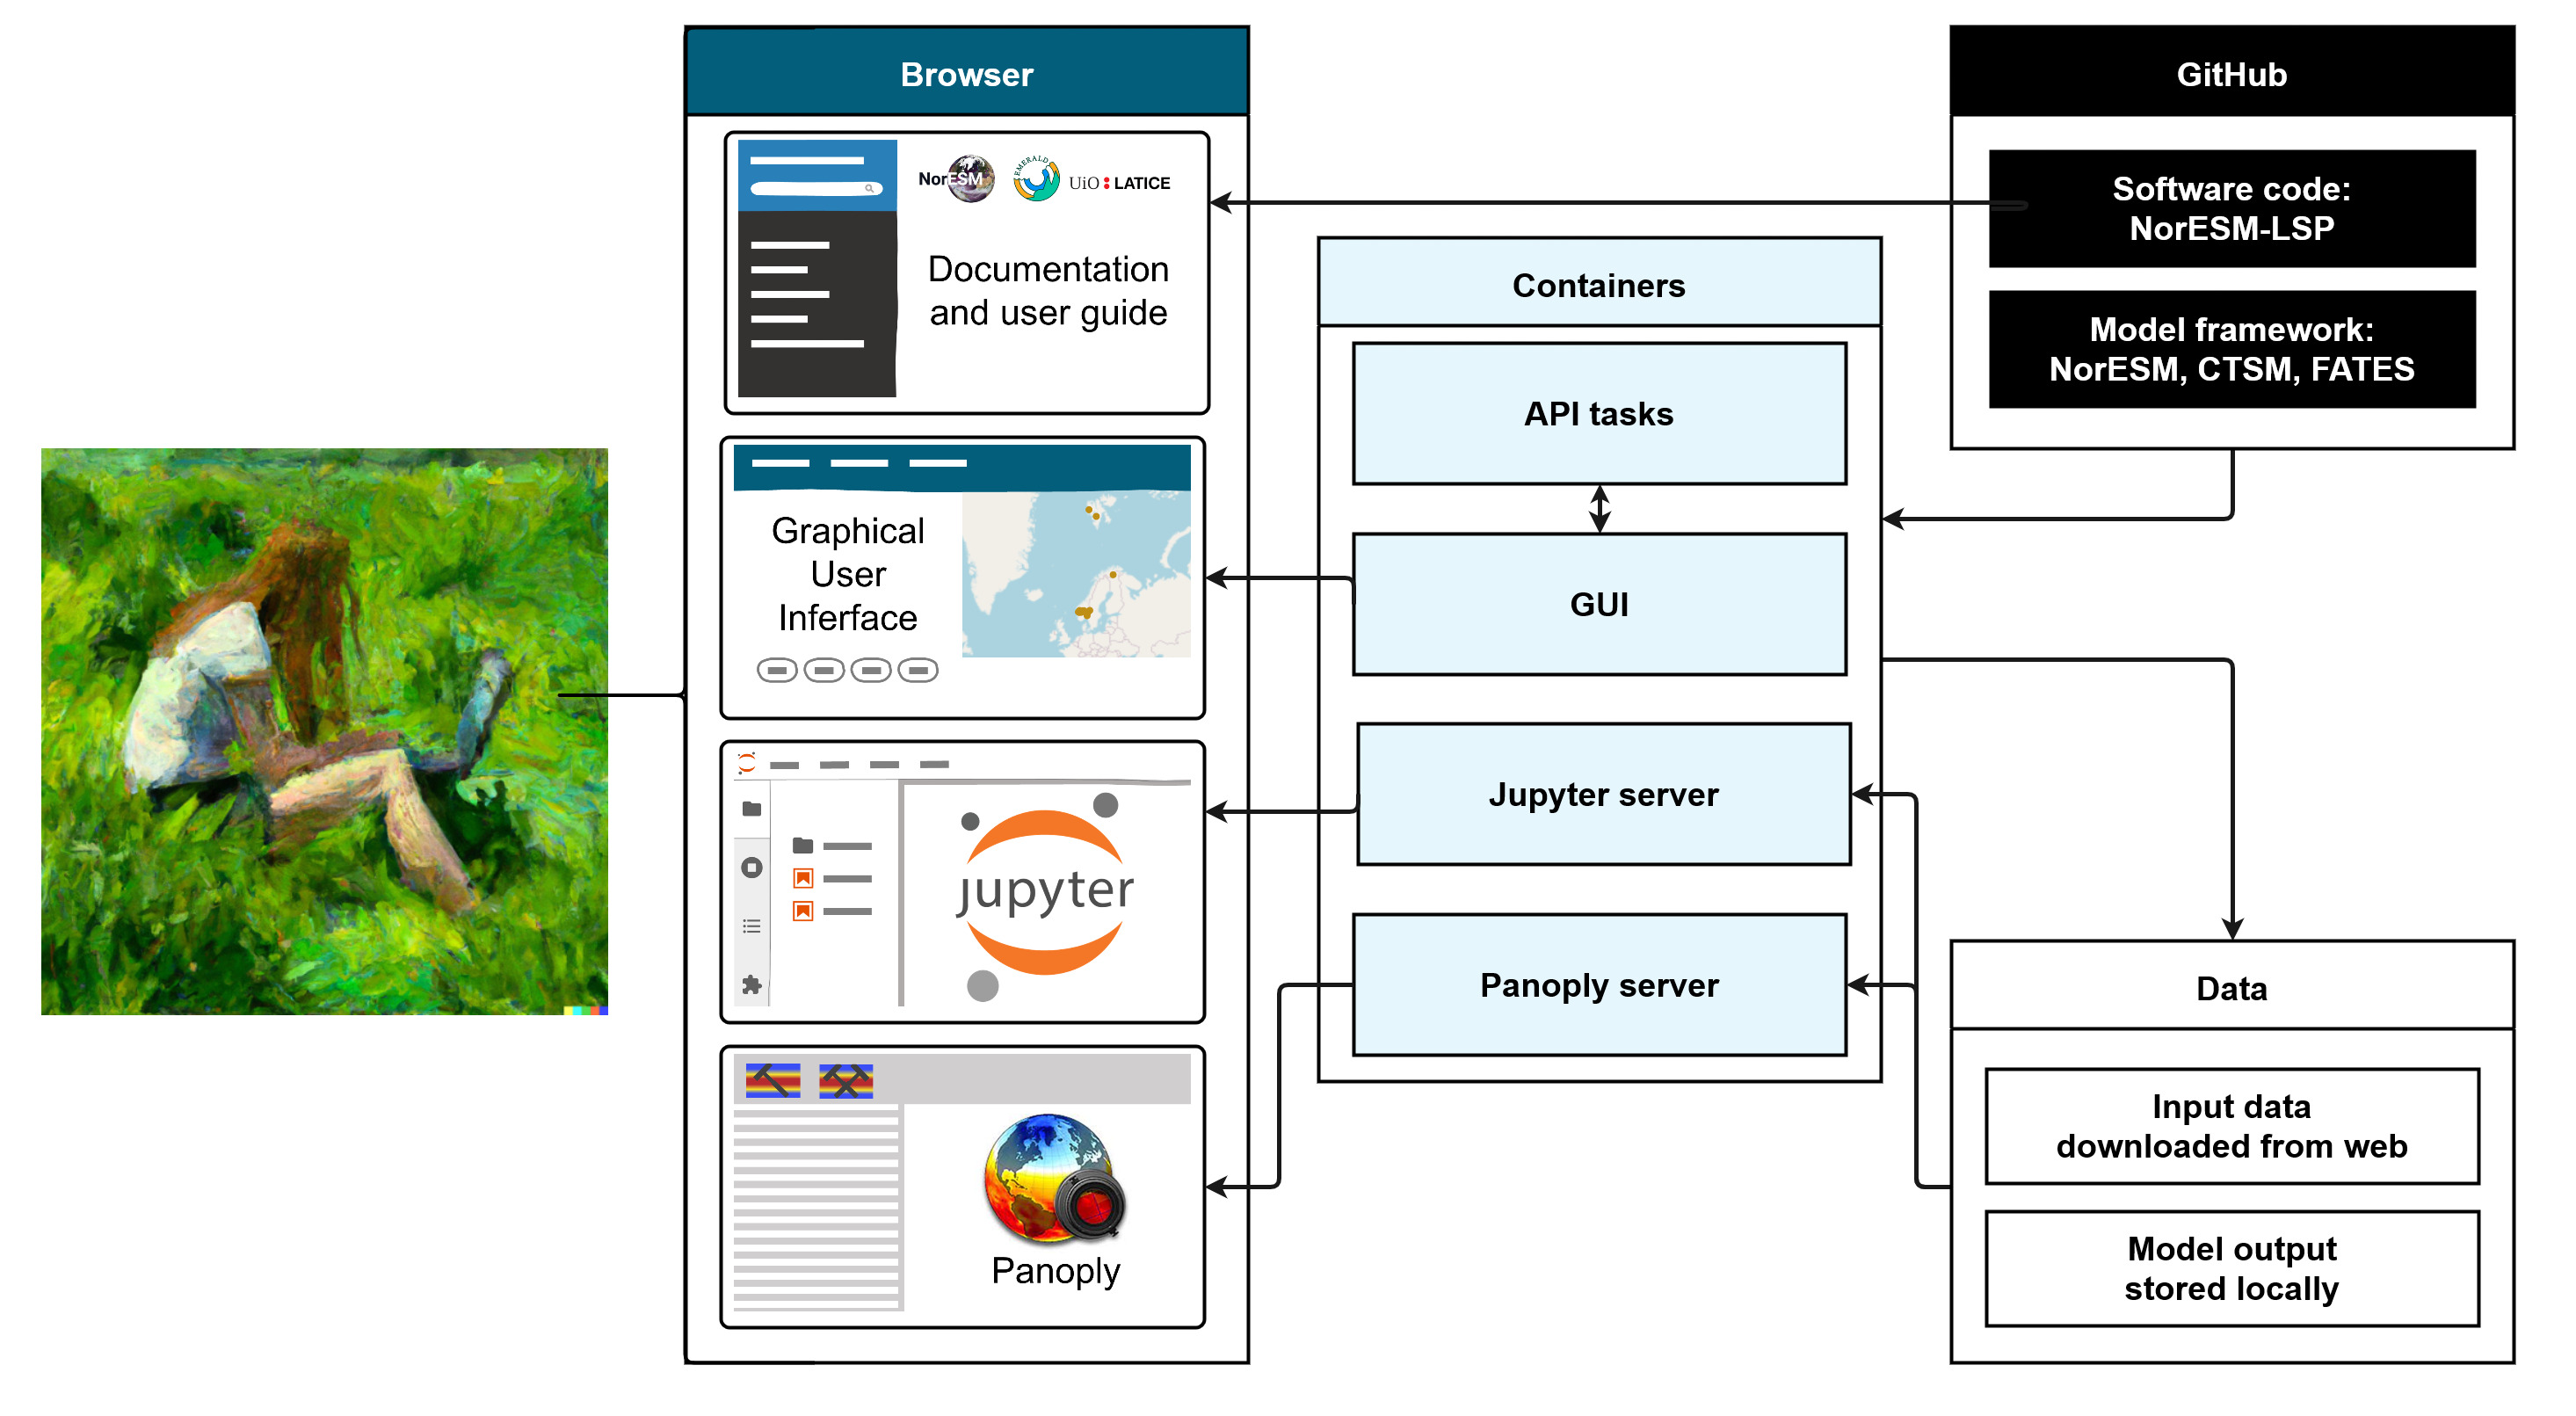 User interfaces and simplified software architecture